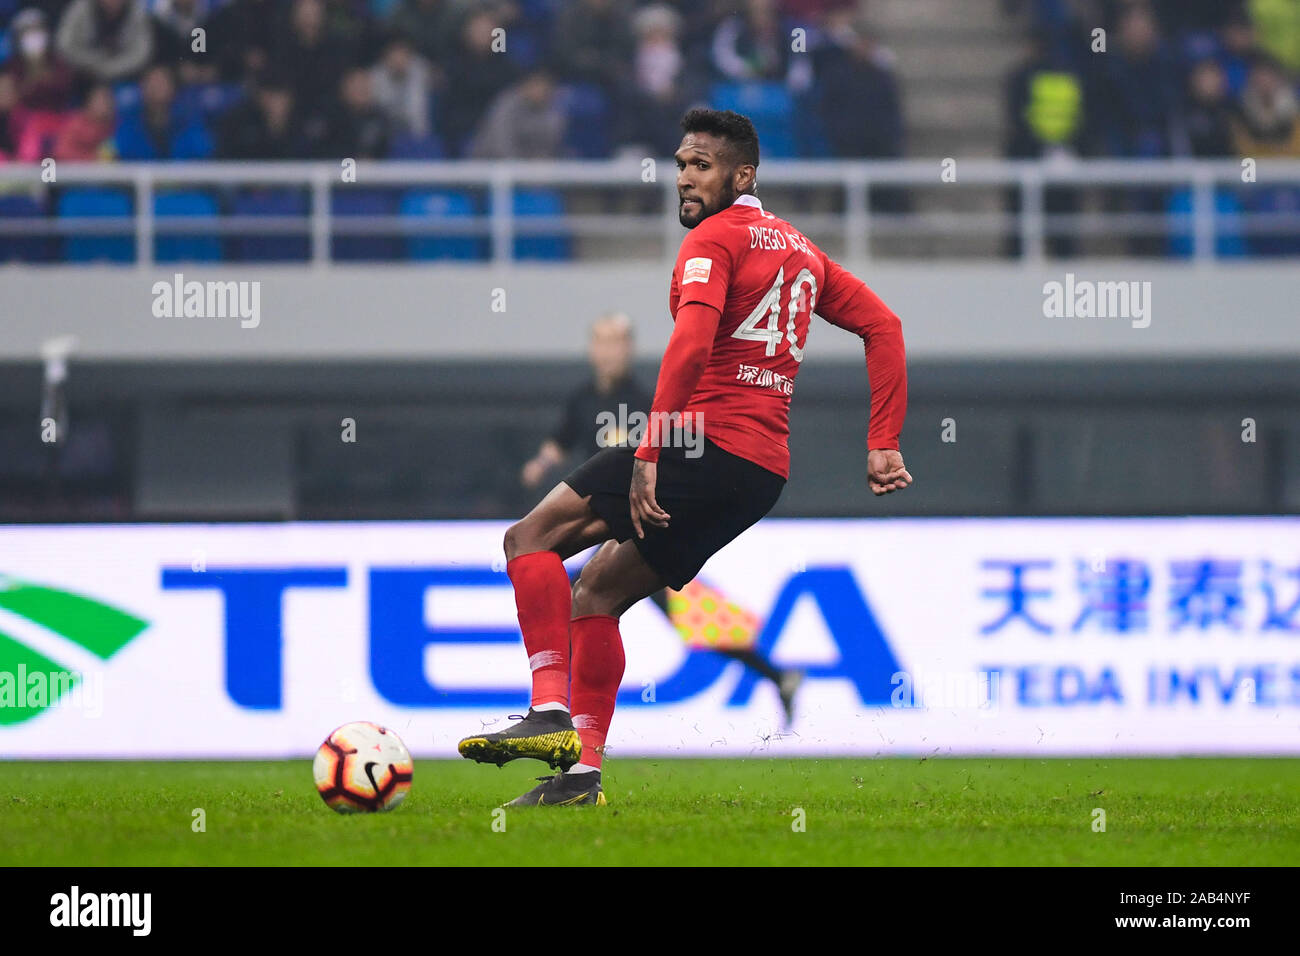 Brazilian-born Portuguese football player Dyego Sousa of Shenzhen F.C. keeps the ball during the 28th round match of Chinese Football Association Super League (CSL) against Tianjin TEDA in Tianjin, China, 23 November 2019. Tianjin TEDA slashed Shenzhen F.C. with 3-0. Stock Photo